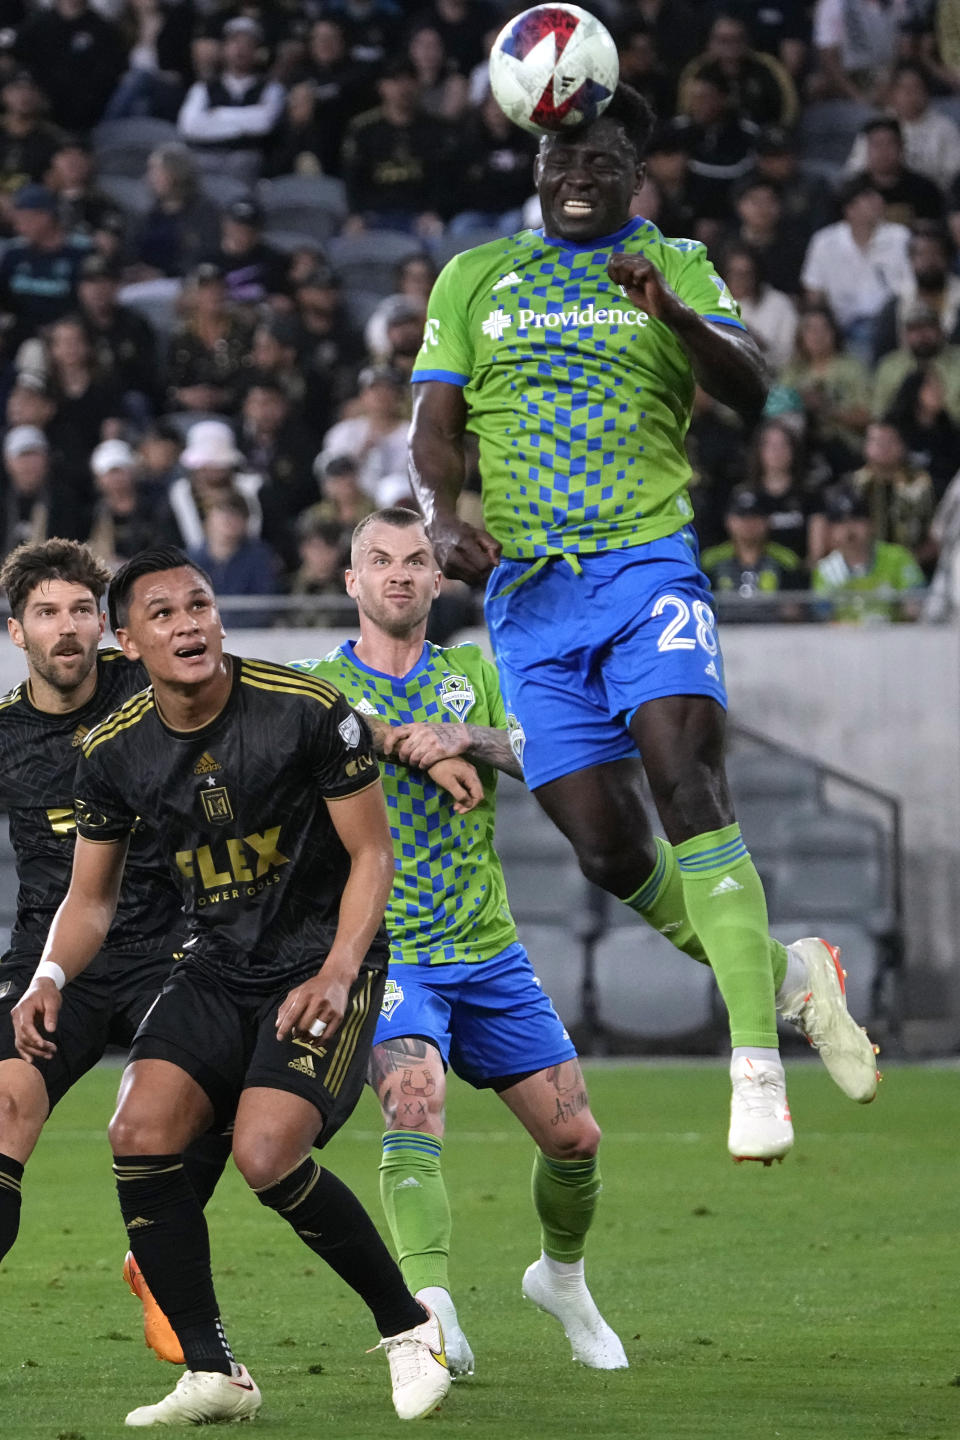 Seattle Sounders defender Yeimar Gomez, right, heads the ball as Los Angeles FC defender Denil Maldonado, second from left, watches during the first half of a Major League Soccer match Wednesday, June 21, 2023, in Los Angeles. (AP Photo/Mark J. Terrill)